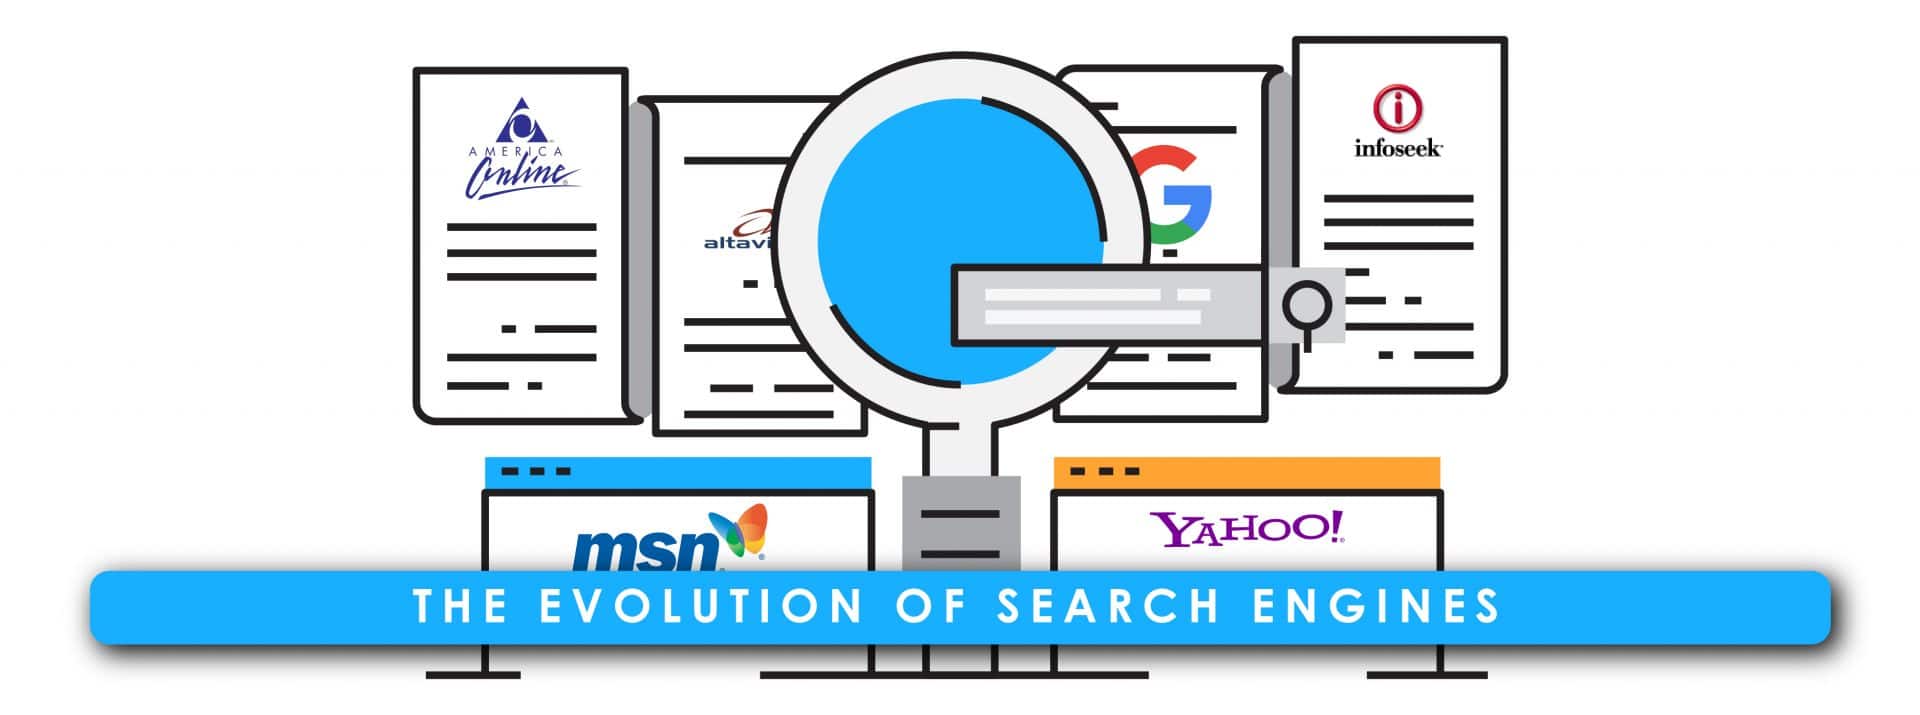 The Evolution of Search Engines